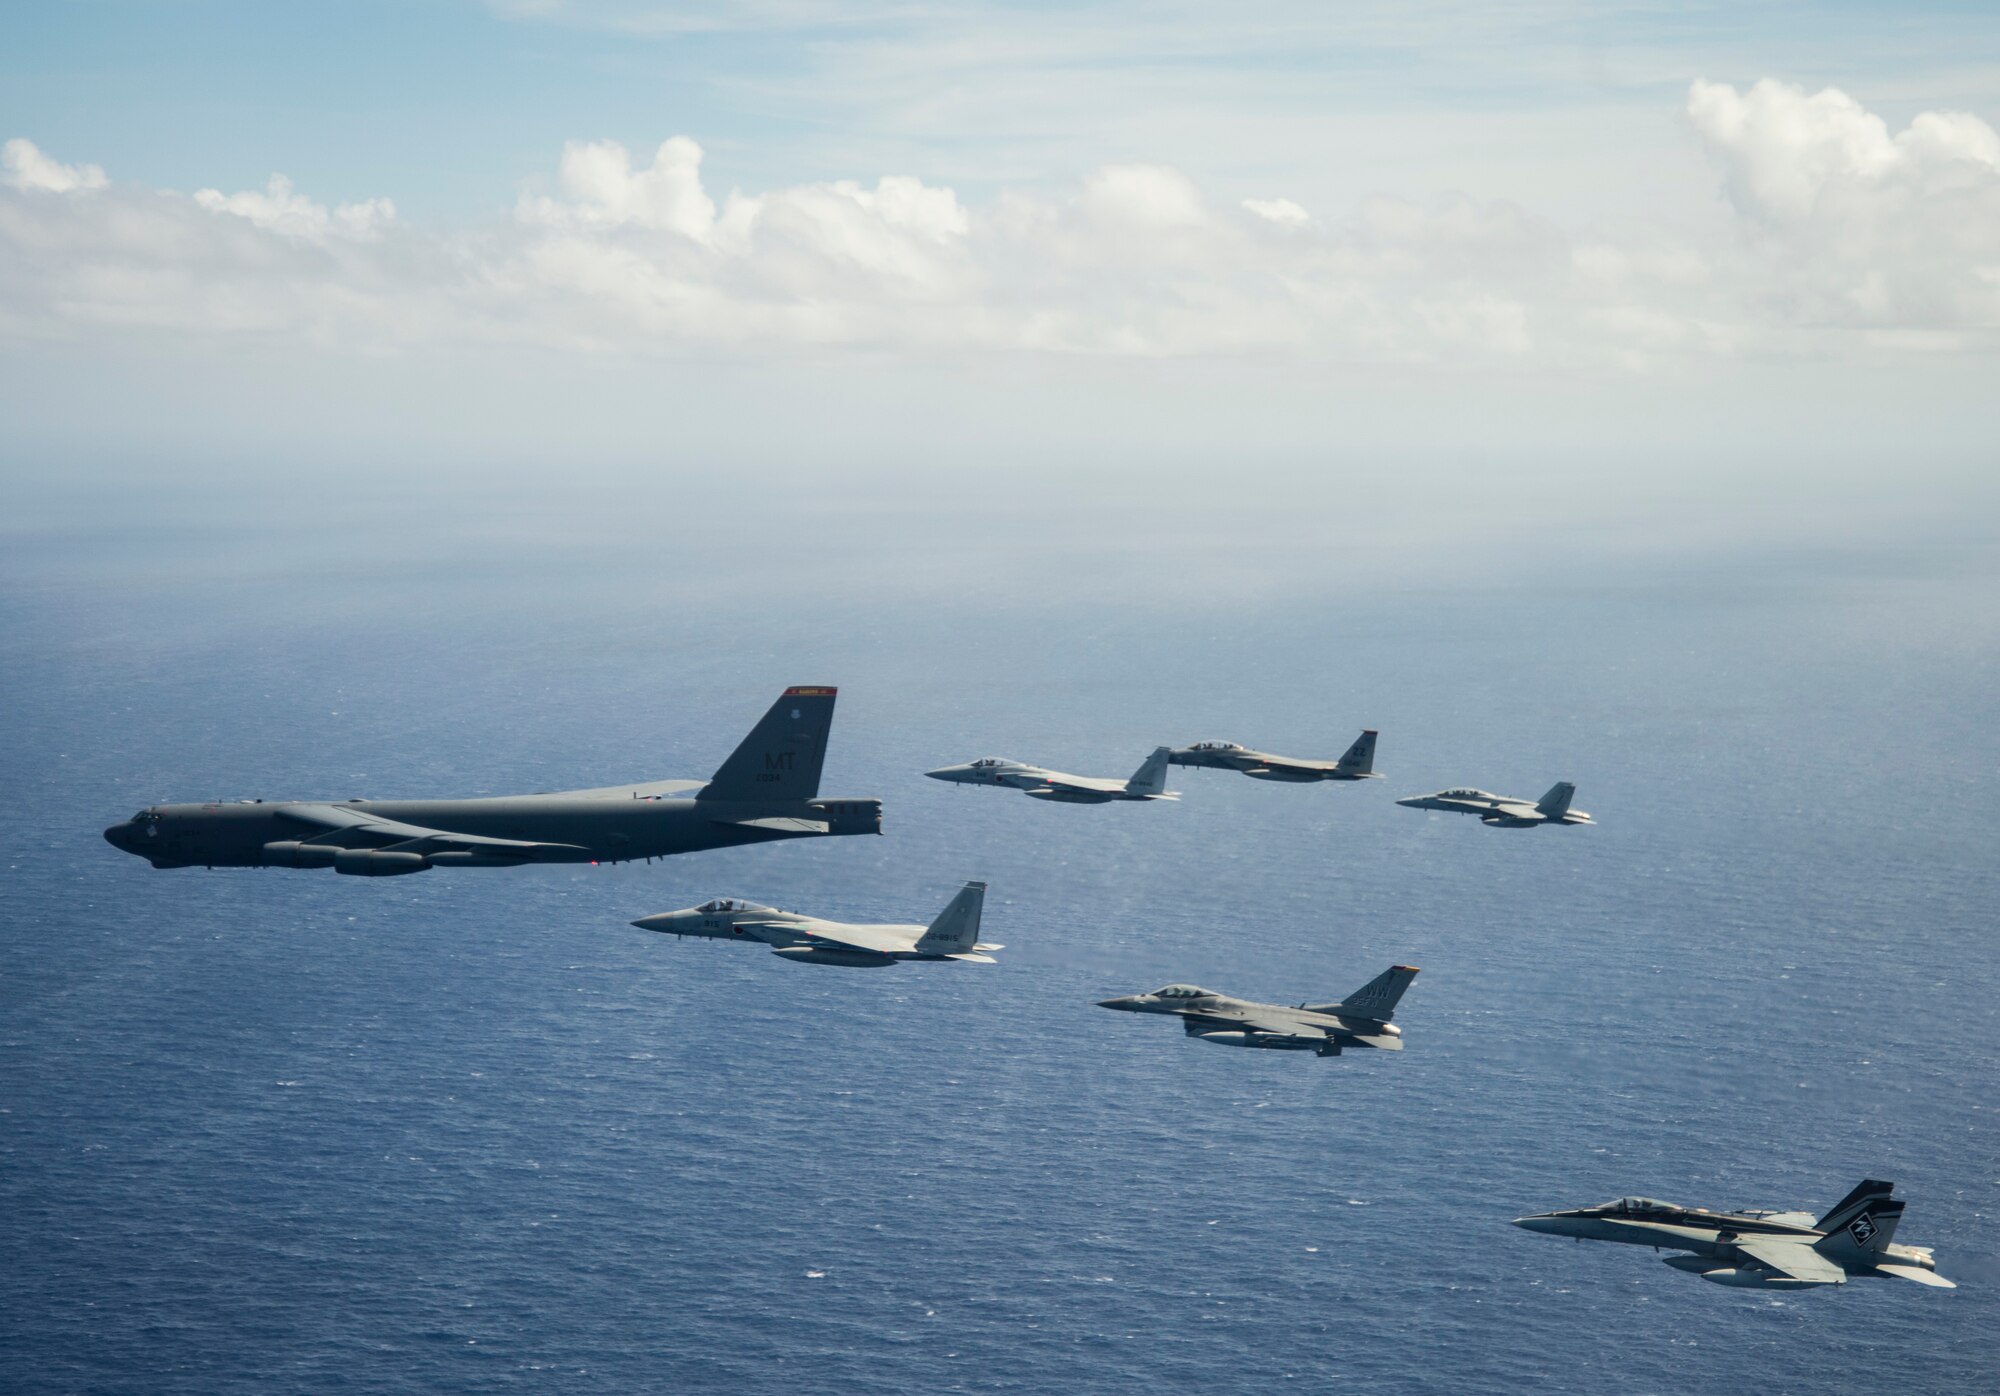 Aircraft from the United States, Australia and Japan participate in a COPE North 2019 airpower demonstration formation over the Pacific Ocean, March 6, 2019.